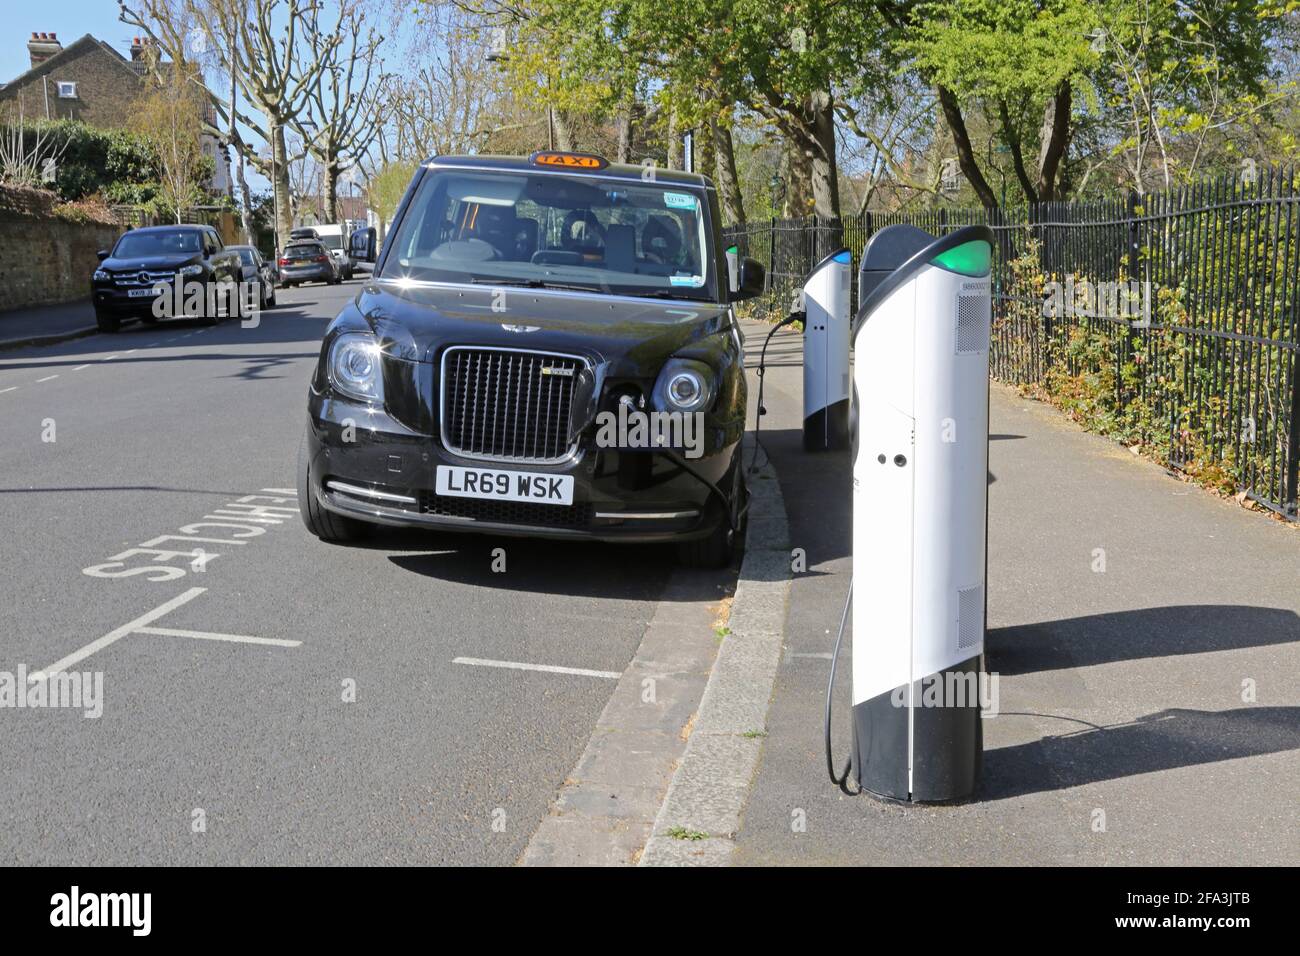 Kerbside electric vehicle charging points on Elmwood Rd in Dulwich, London, UK. Shows new LEVC TX plug-in hybrid electric taxi connected and charging. Stock Photo